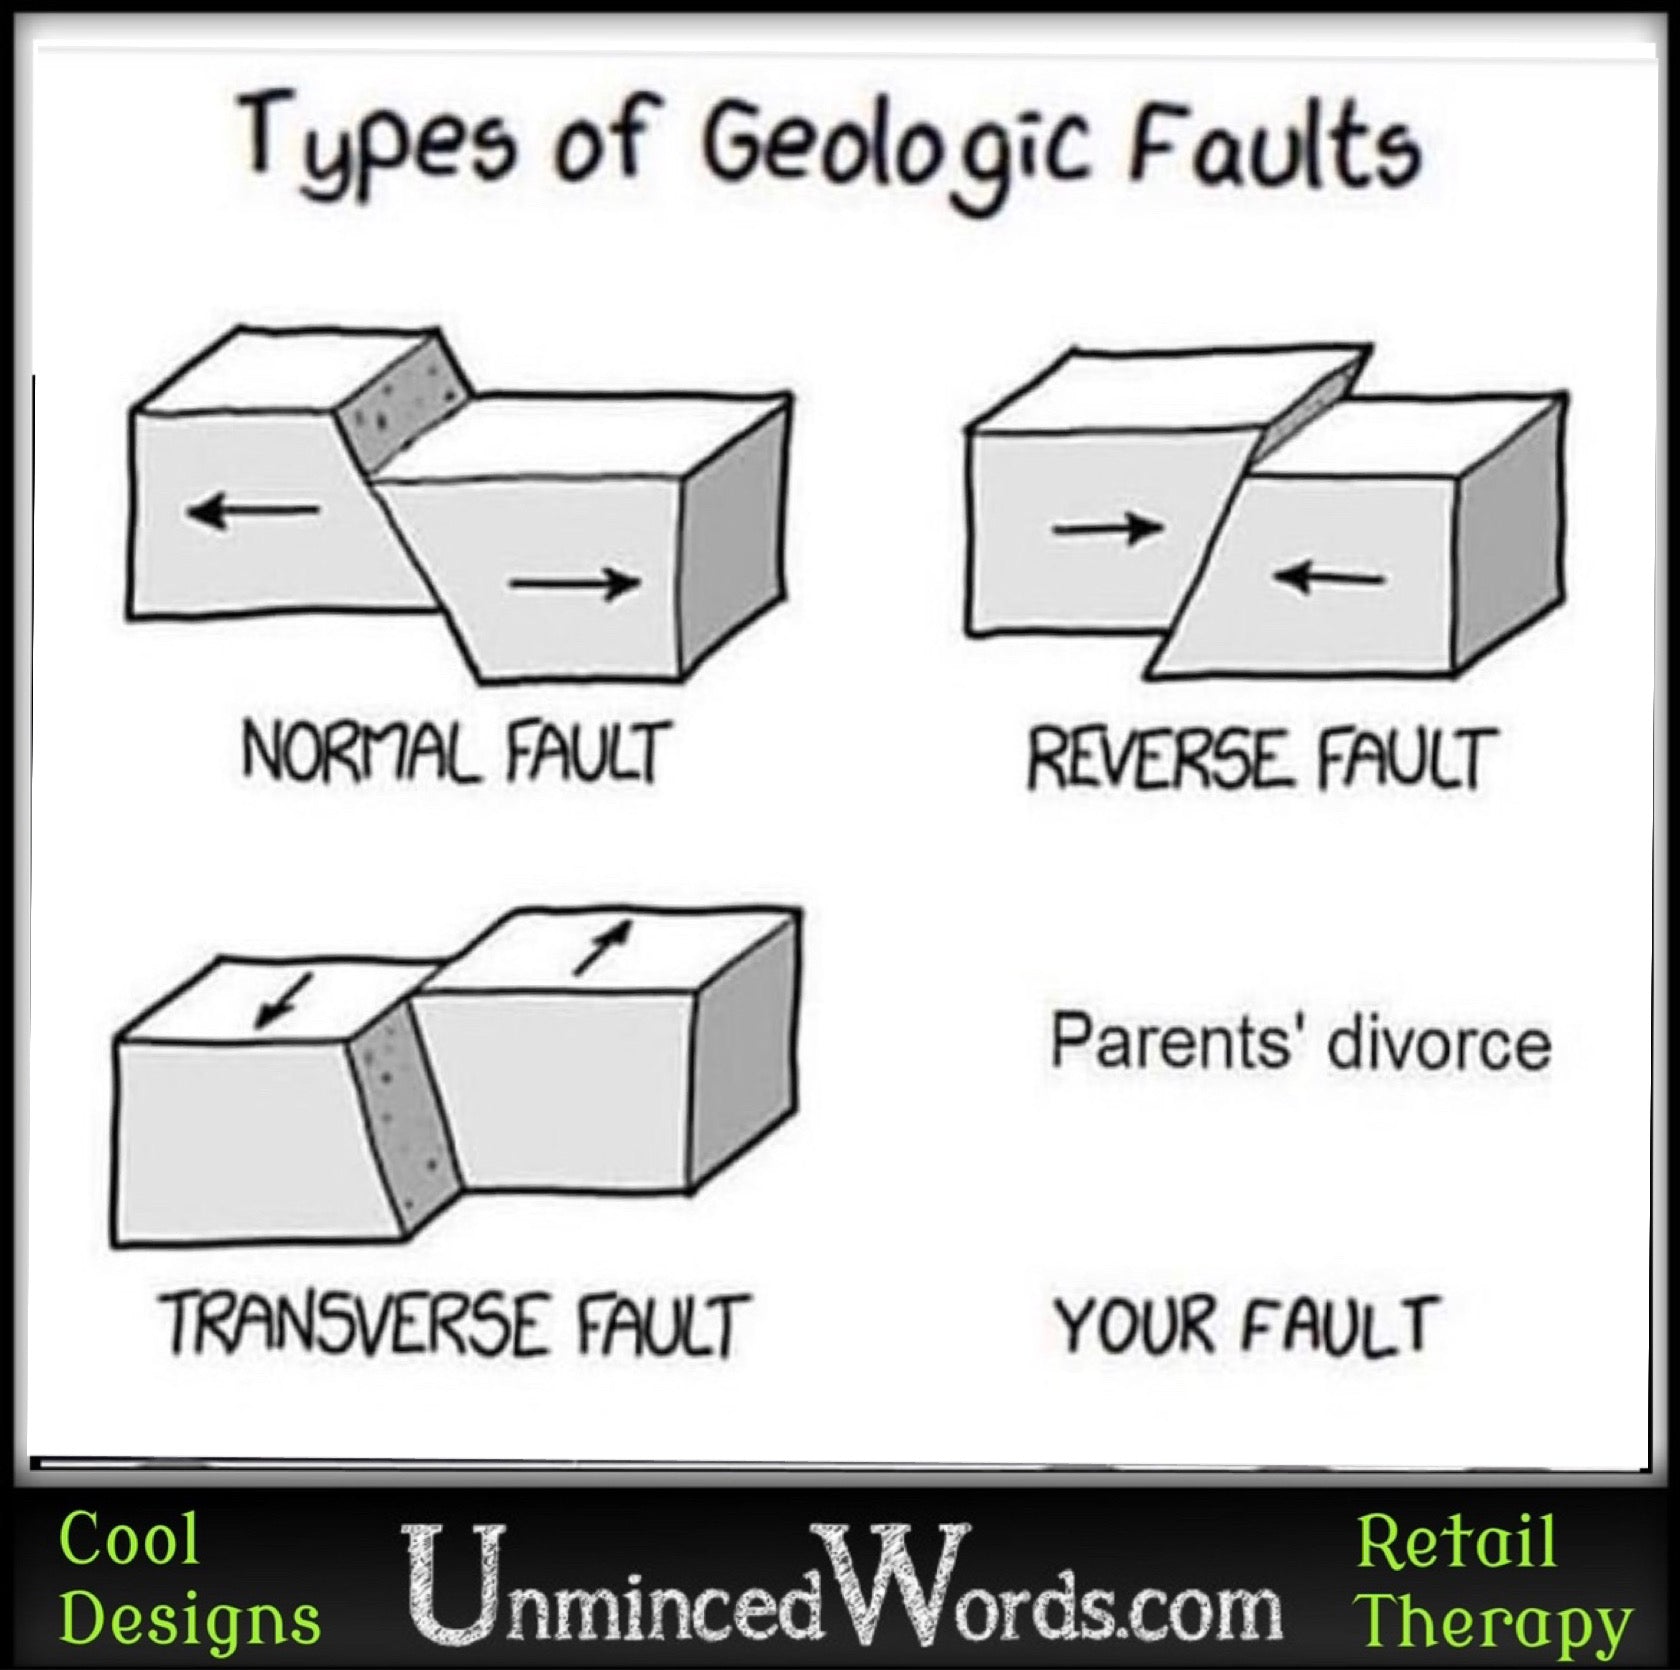 Types of faults, truth and humor